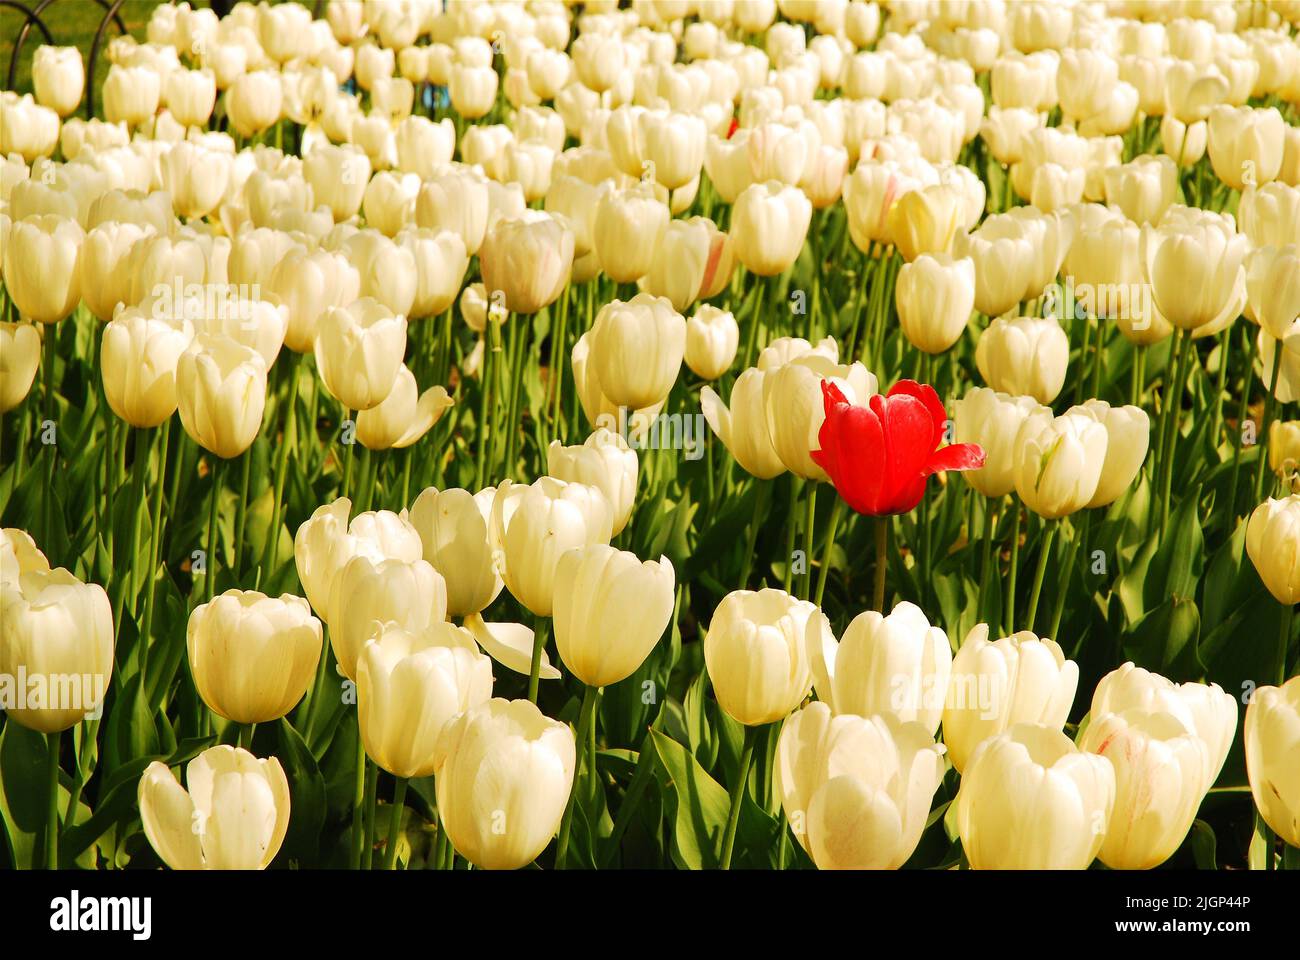 A lone red tulip stands out distinctively from the surrounding colorless flowers in a garden symbolizing individuality and uniqueness Stock Photo